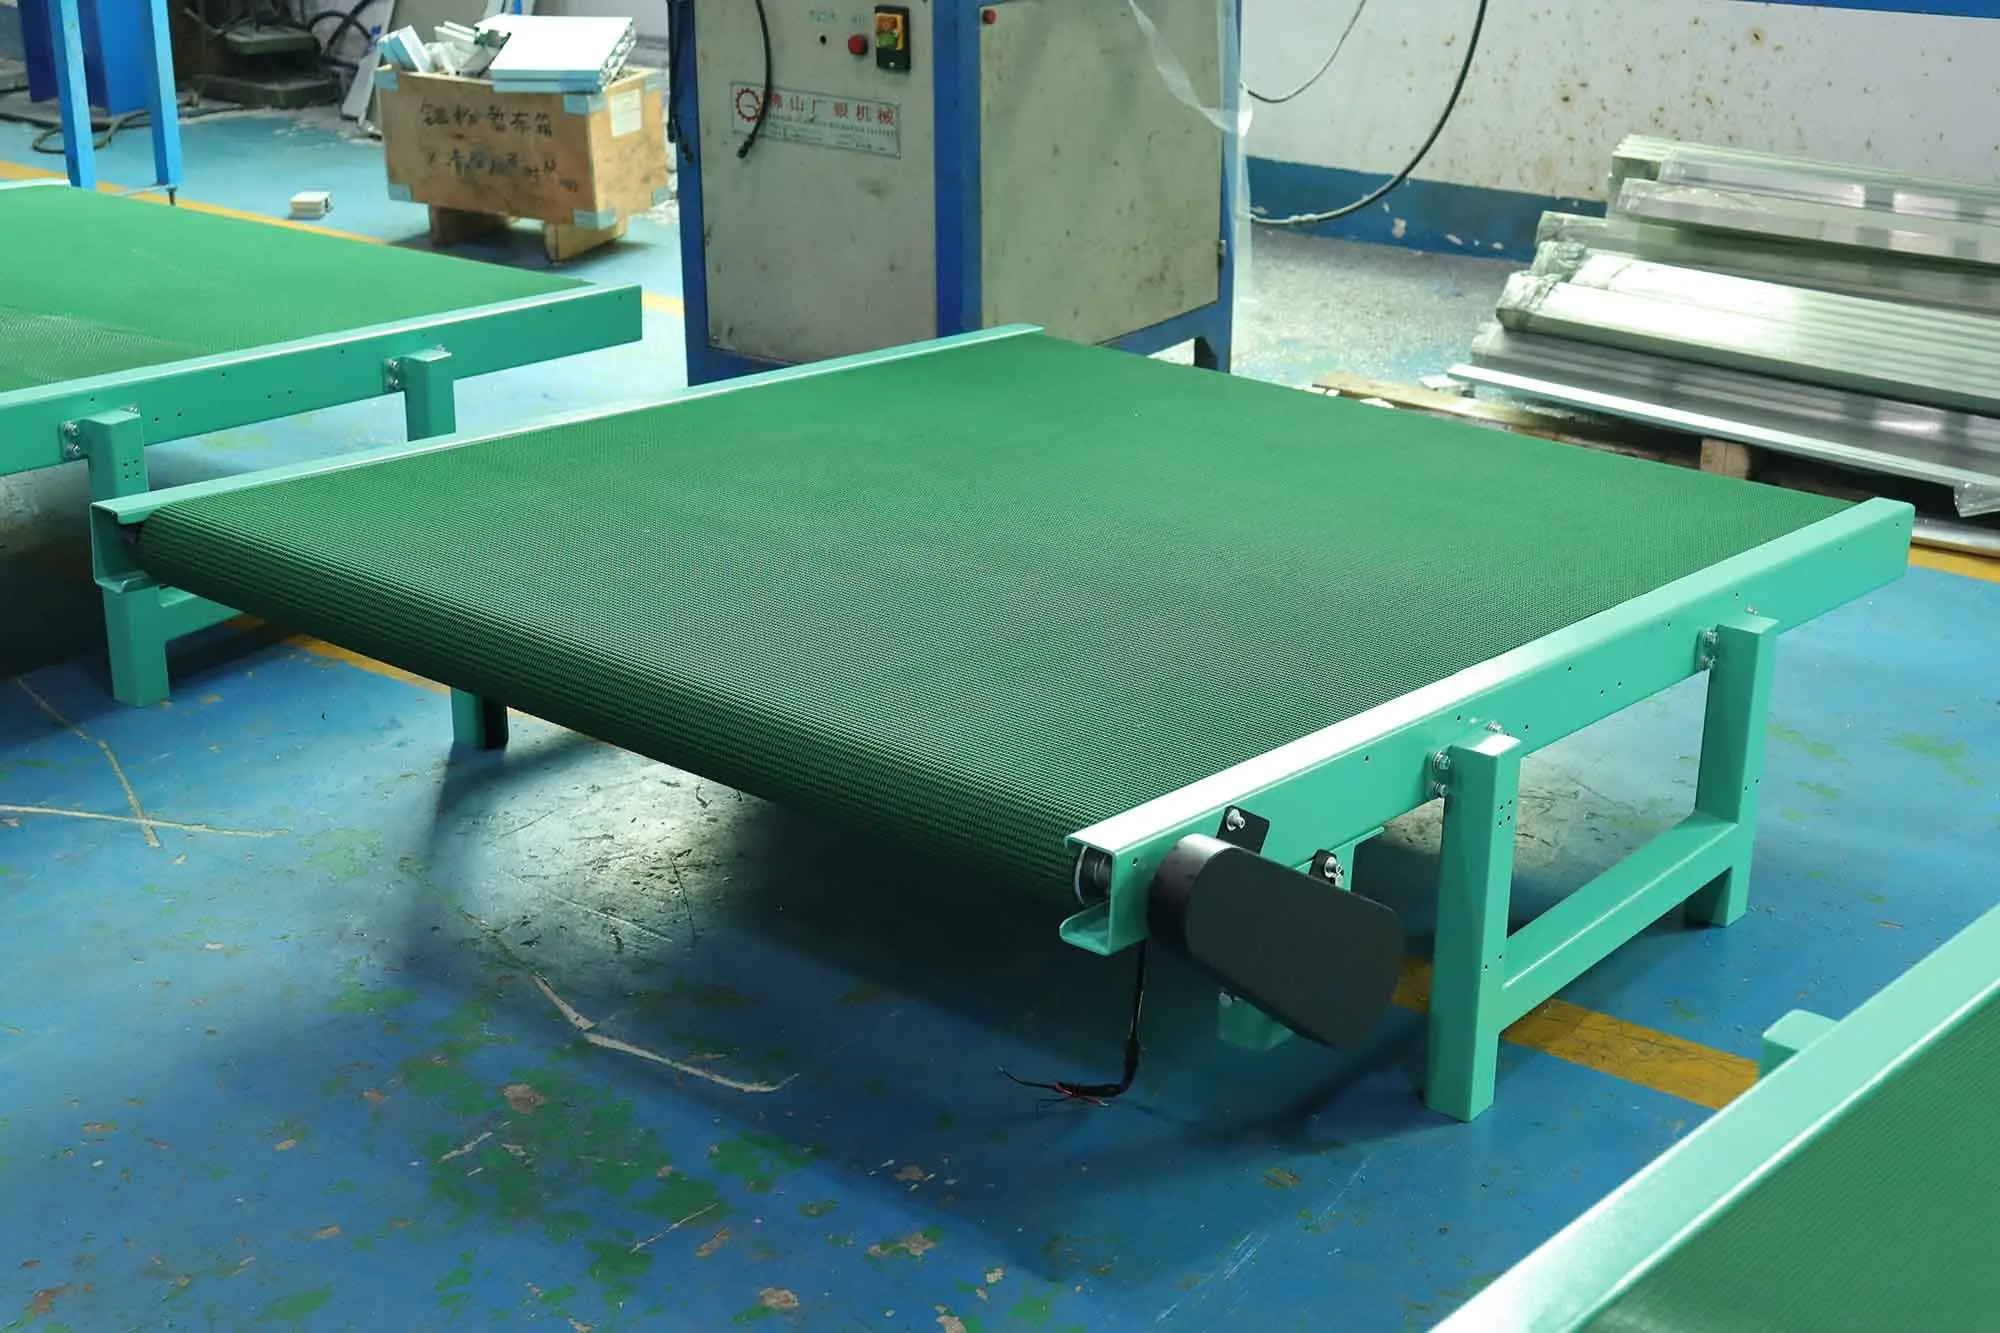 A super large curved belt conveyor suitable for sheet metal conveying produced in Foshan, China factory